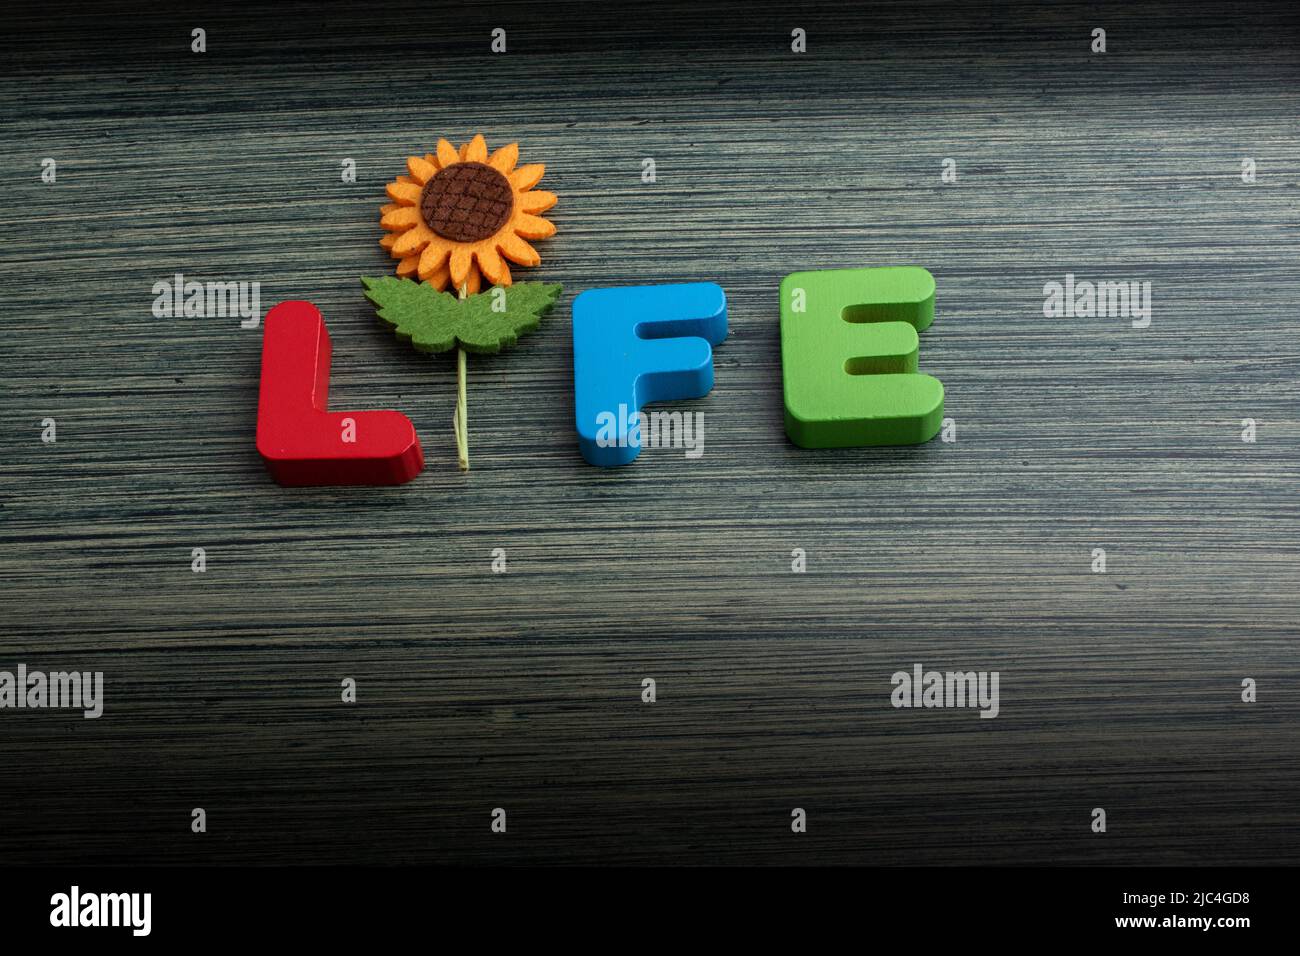 Life wording with the help of a fake flower in view Stock Photo